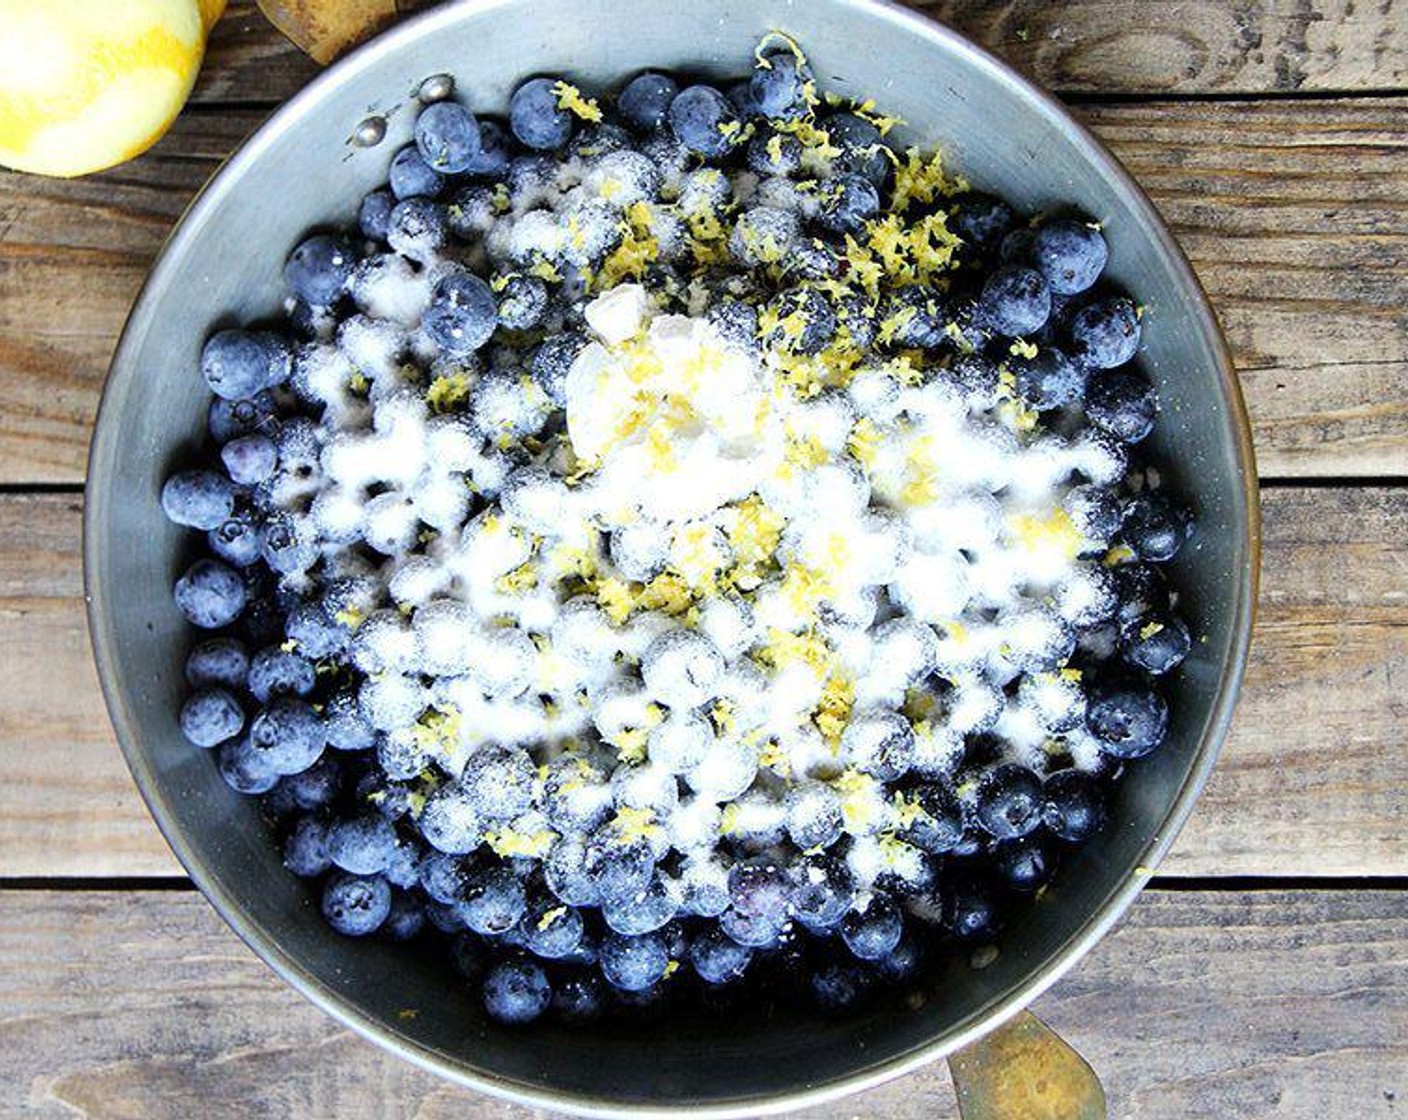 step 2 For the filling: Stir the Granulated Sugar (1/2 cup), Corn Starch (1 Tbsp) and Salt (1 pinch) together in a large bowl. Add the Fresh Blueberries (6 cups) and mix gently with a rubber spatula until evenly coated; add the zest of the Lemon (1) plus the juice from 1/2, and mix to combine.